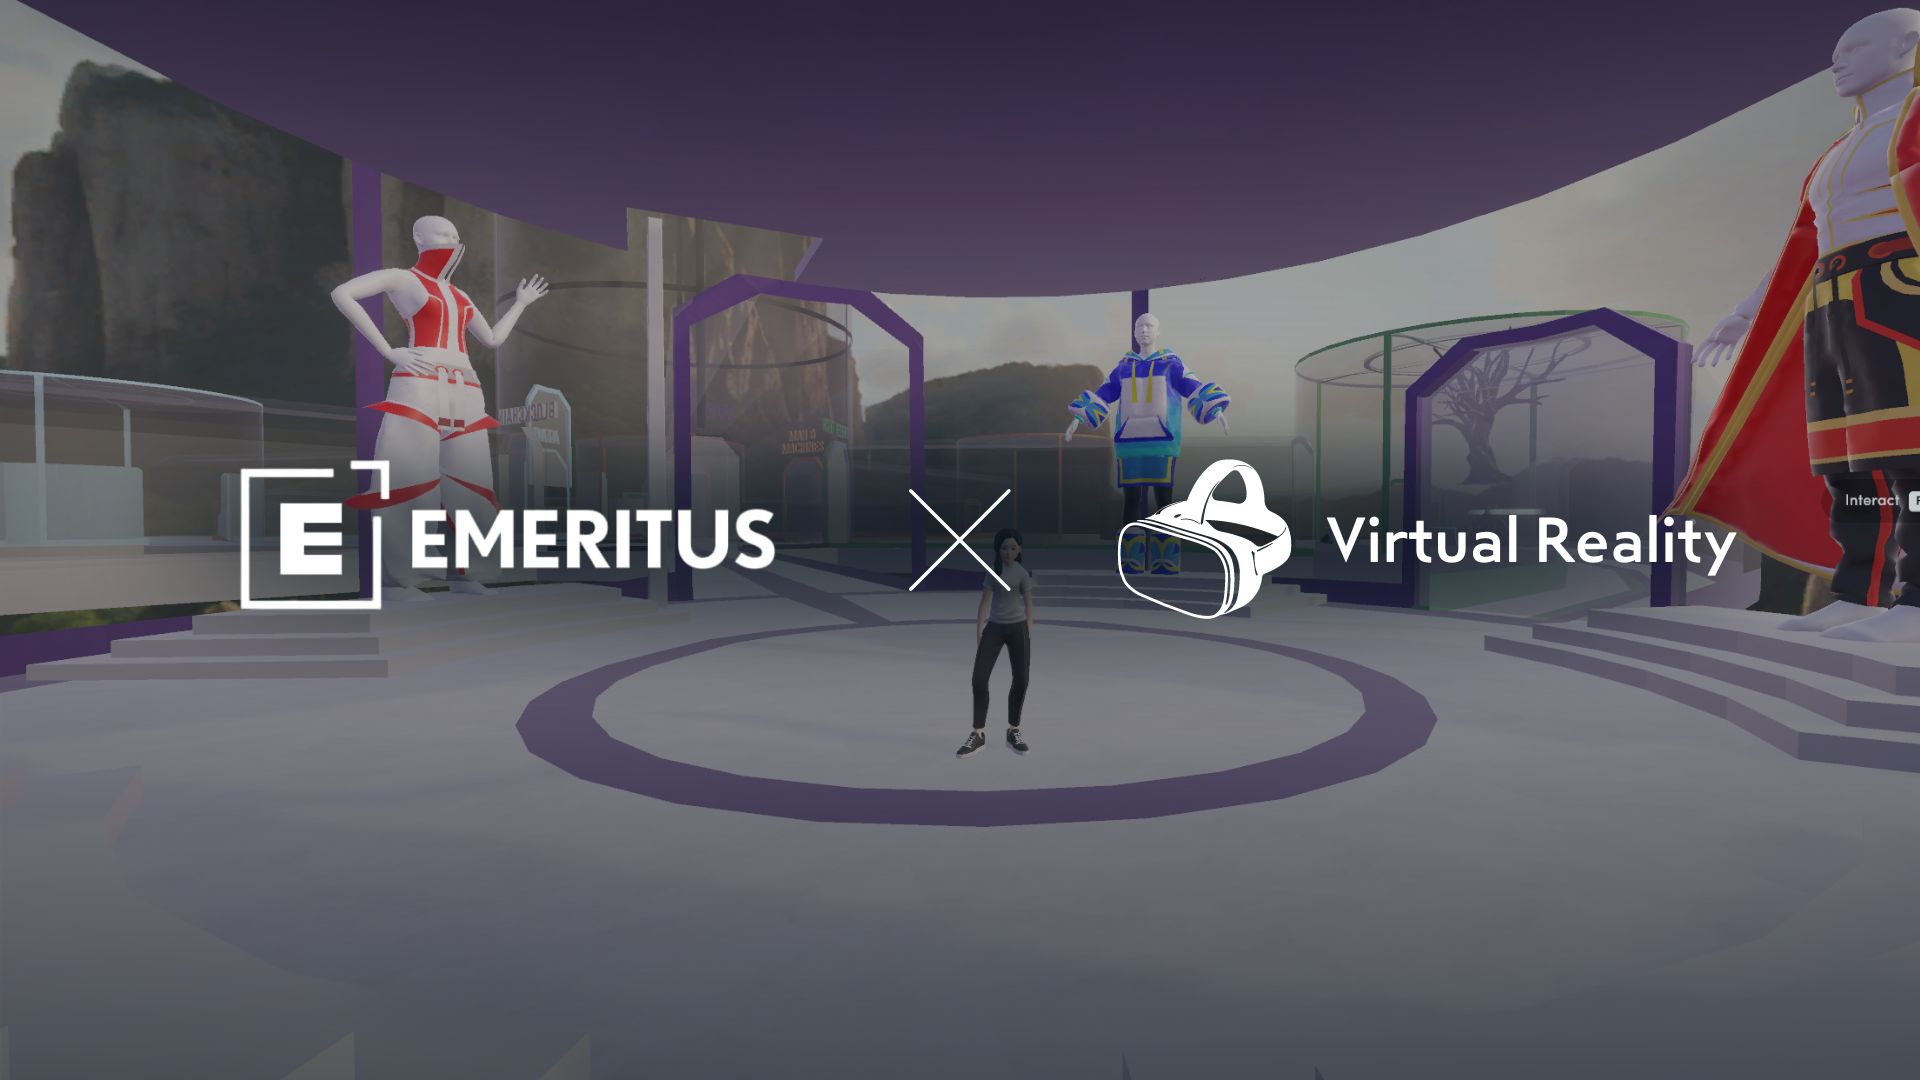 Emeritus Logo and VR Headset Logo with the word Virtual Reality